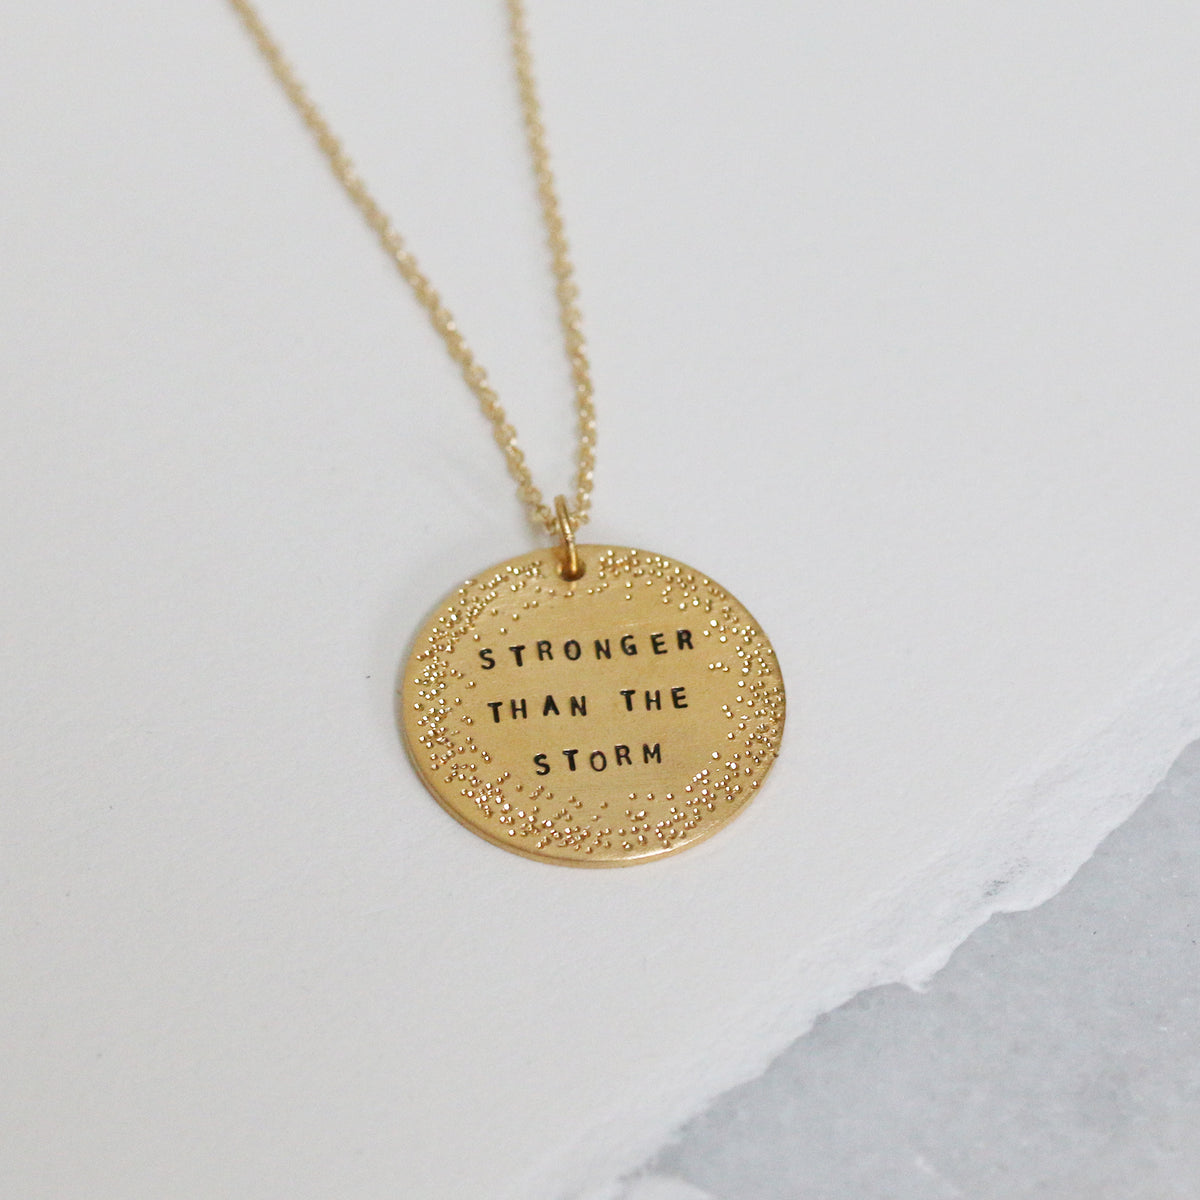 DIAMOND DUSTED SMALL COIN NECKLACE